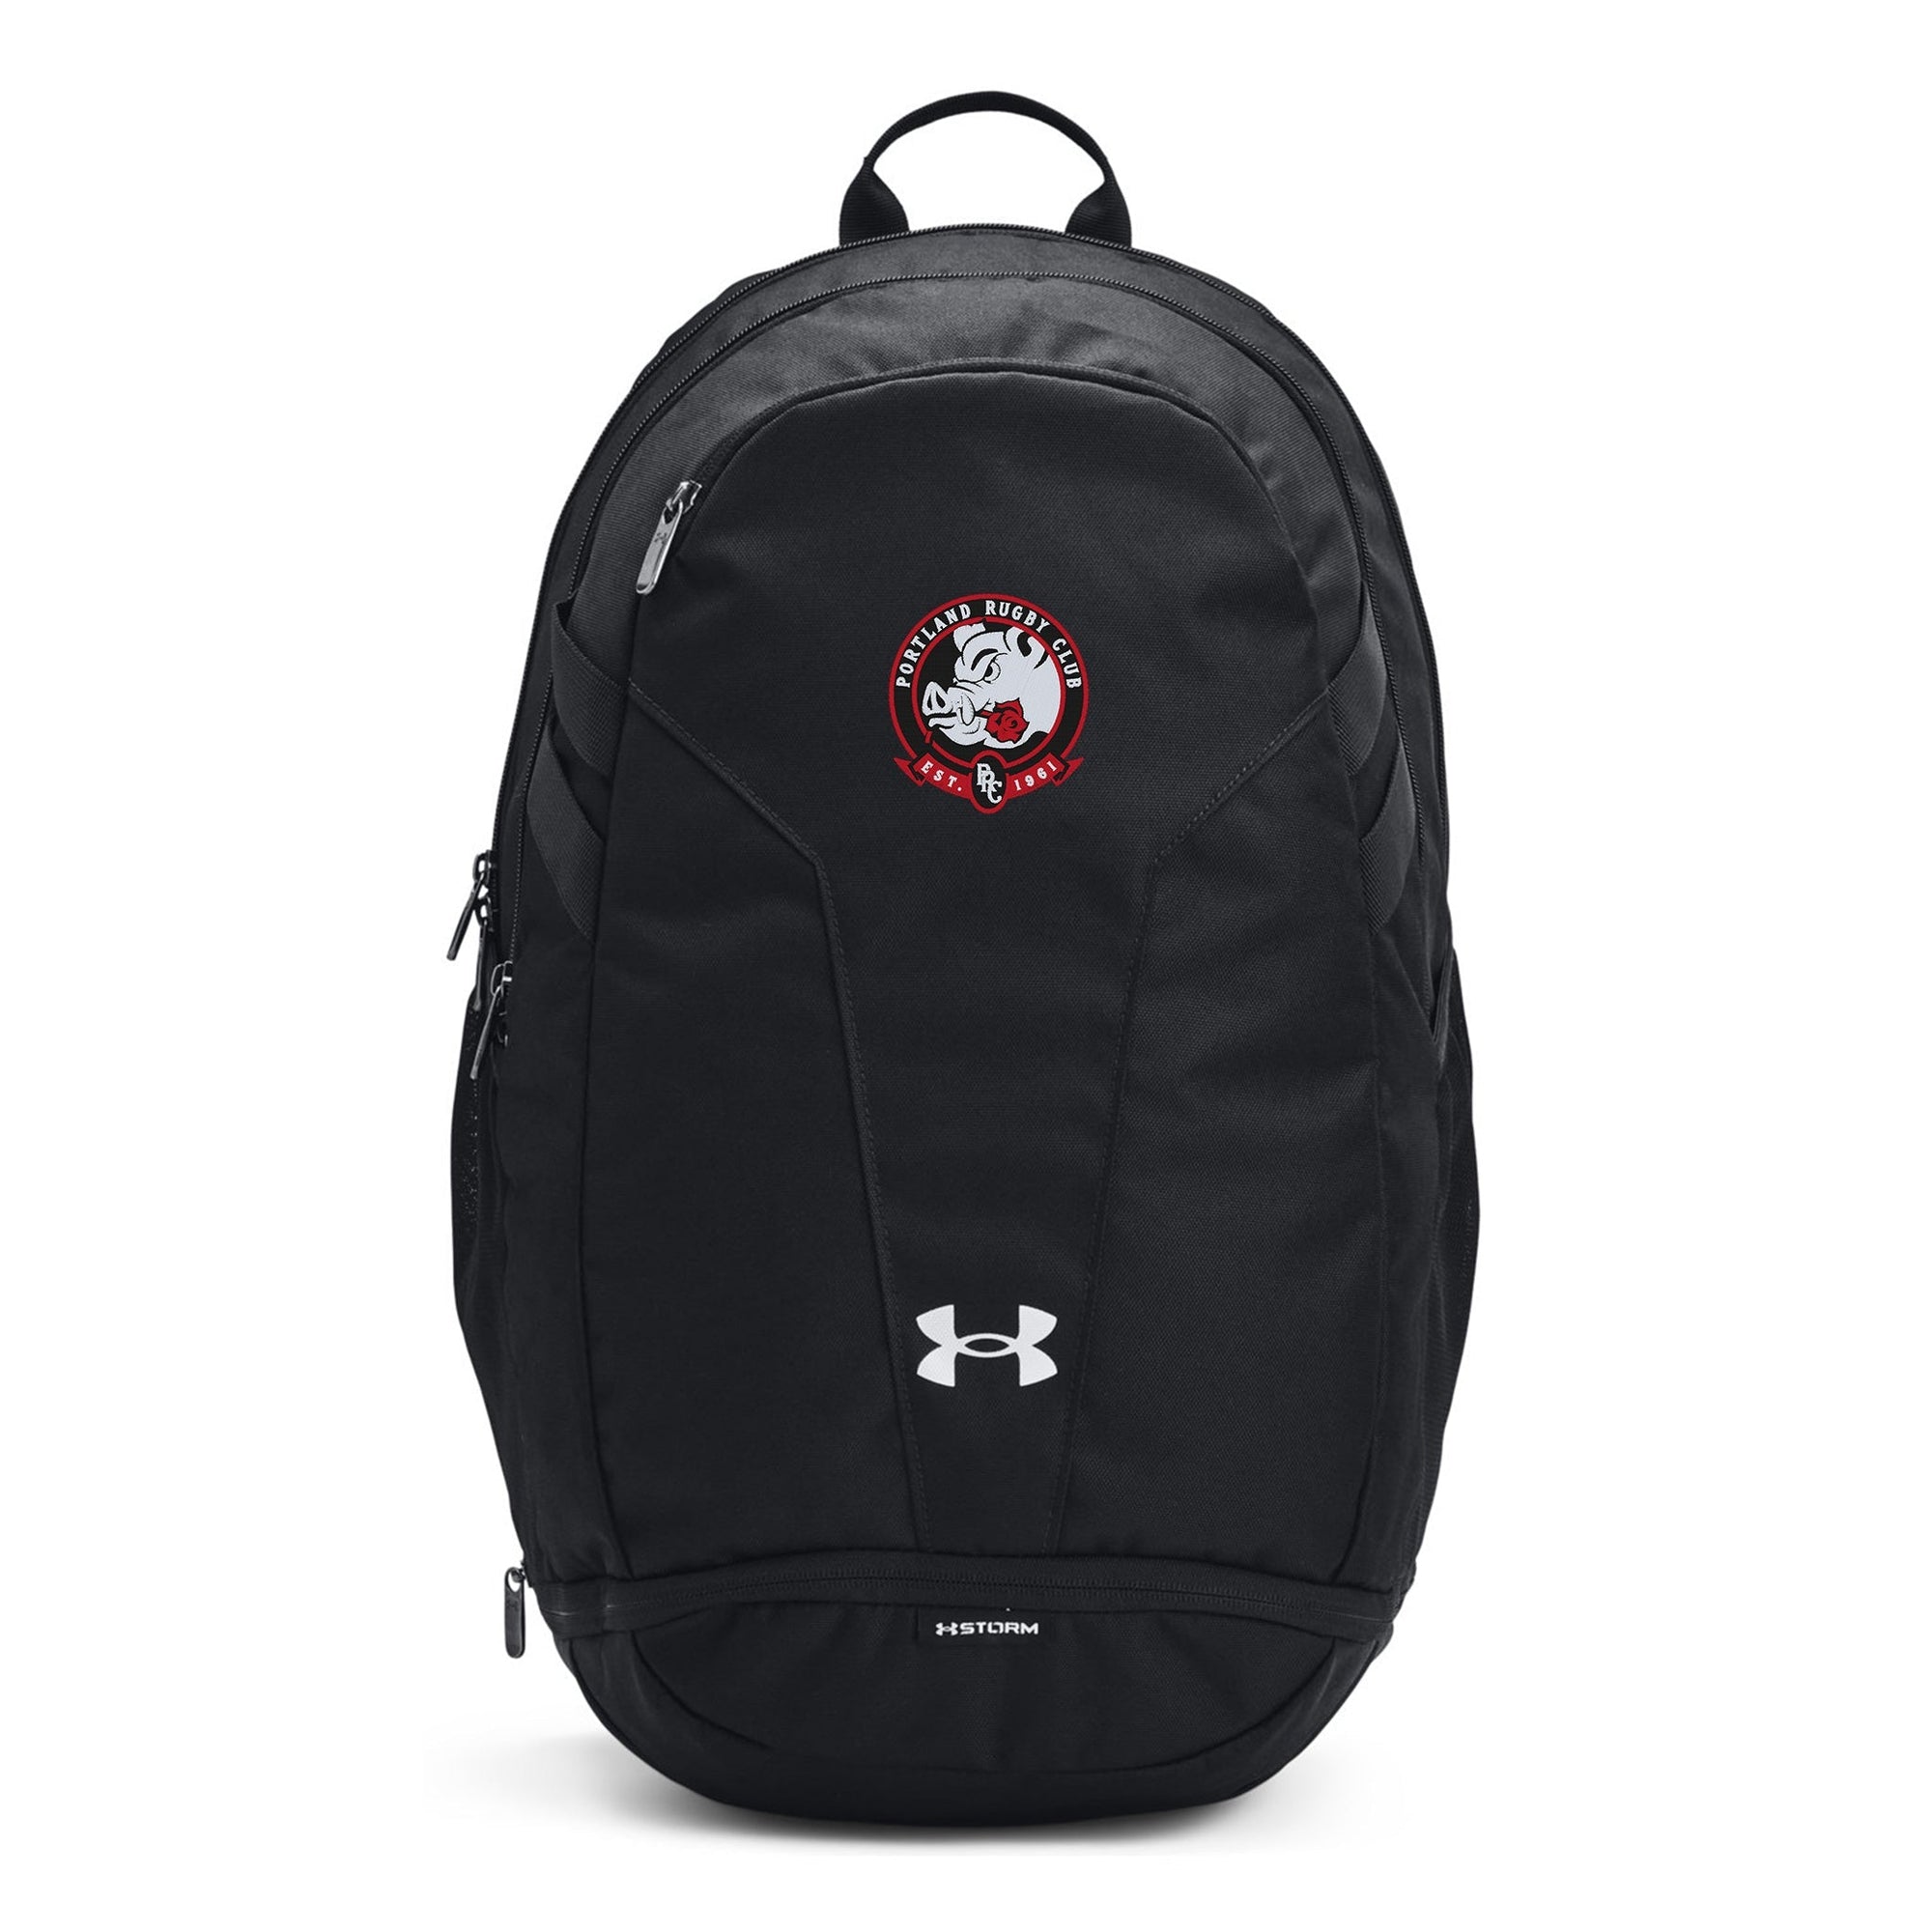 Rugby Imports Portland Pigs Hustle 5.0 Backpack